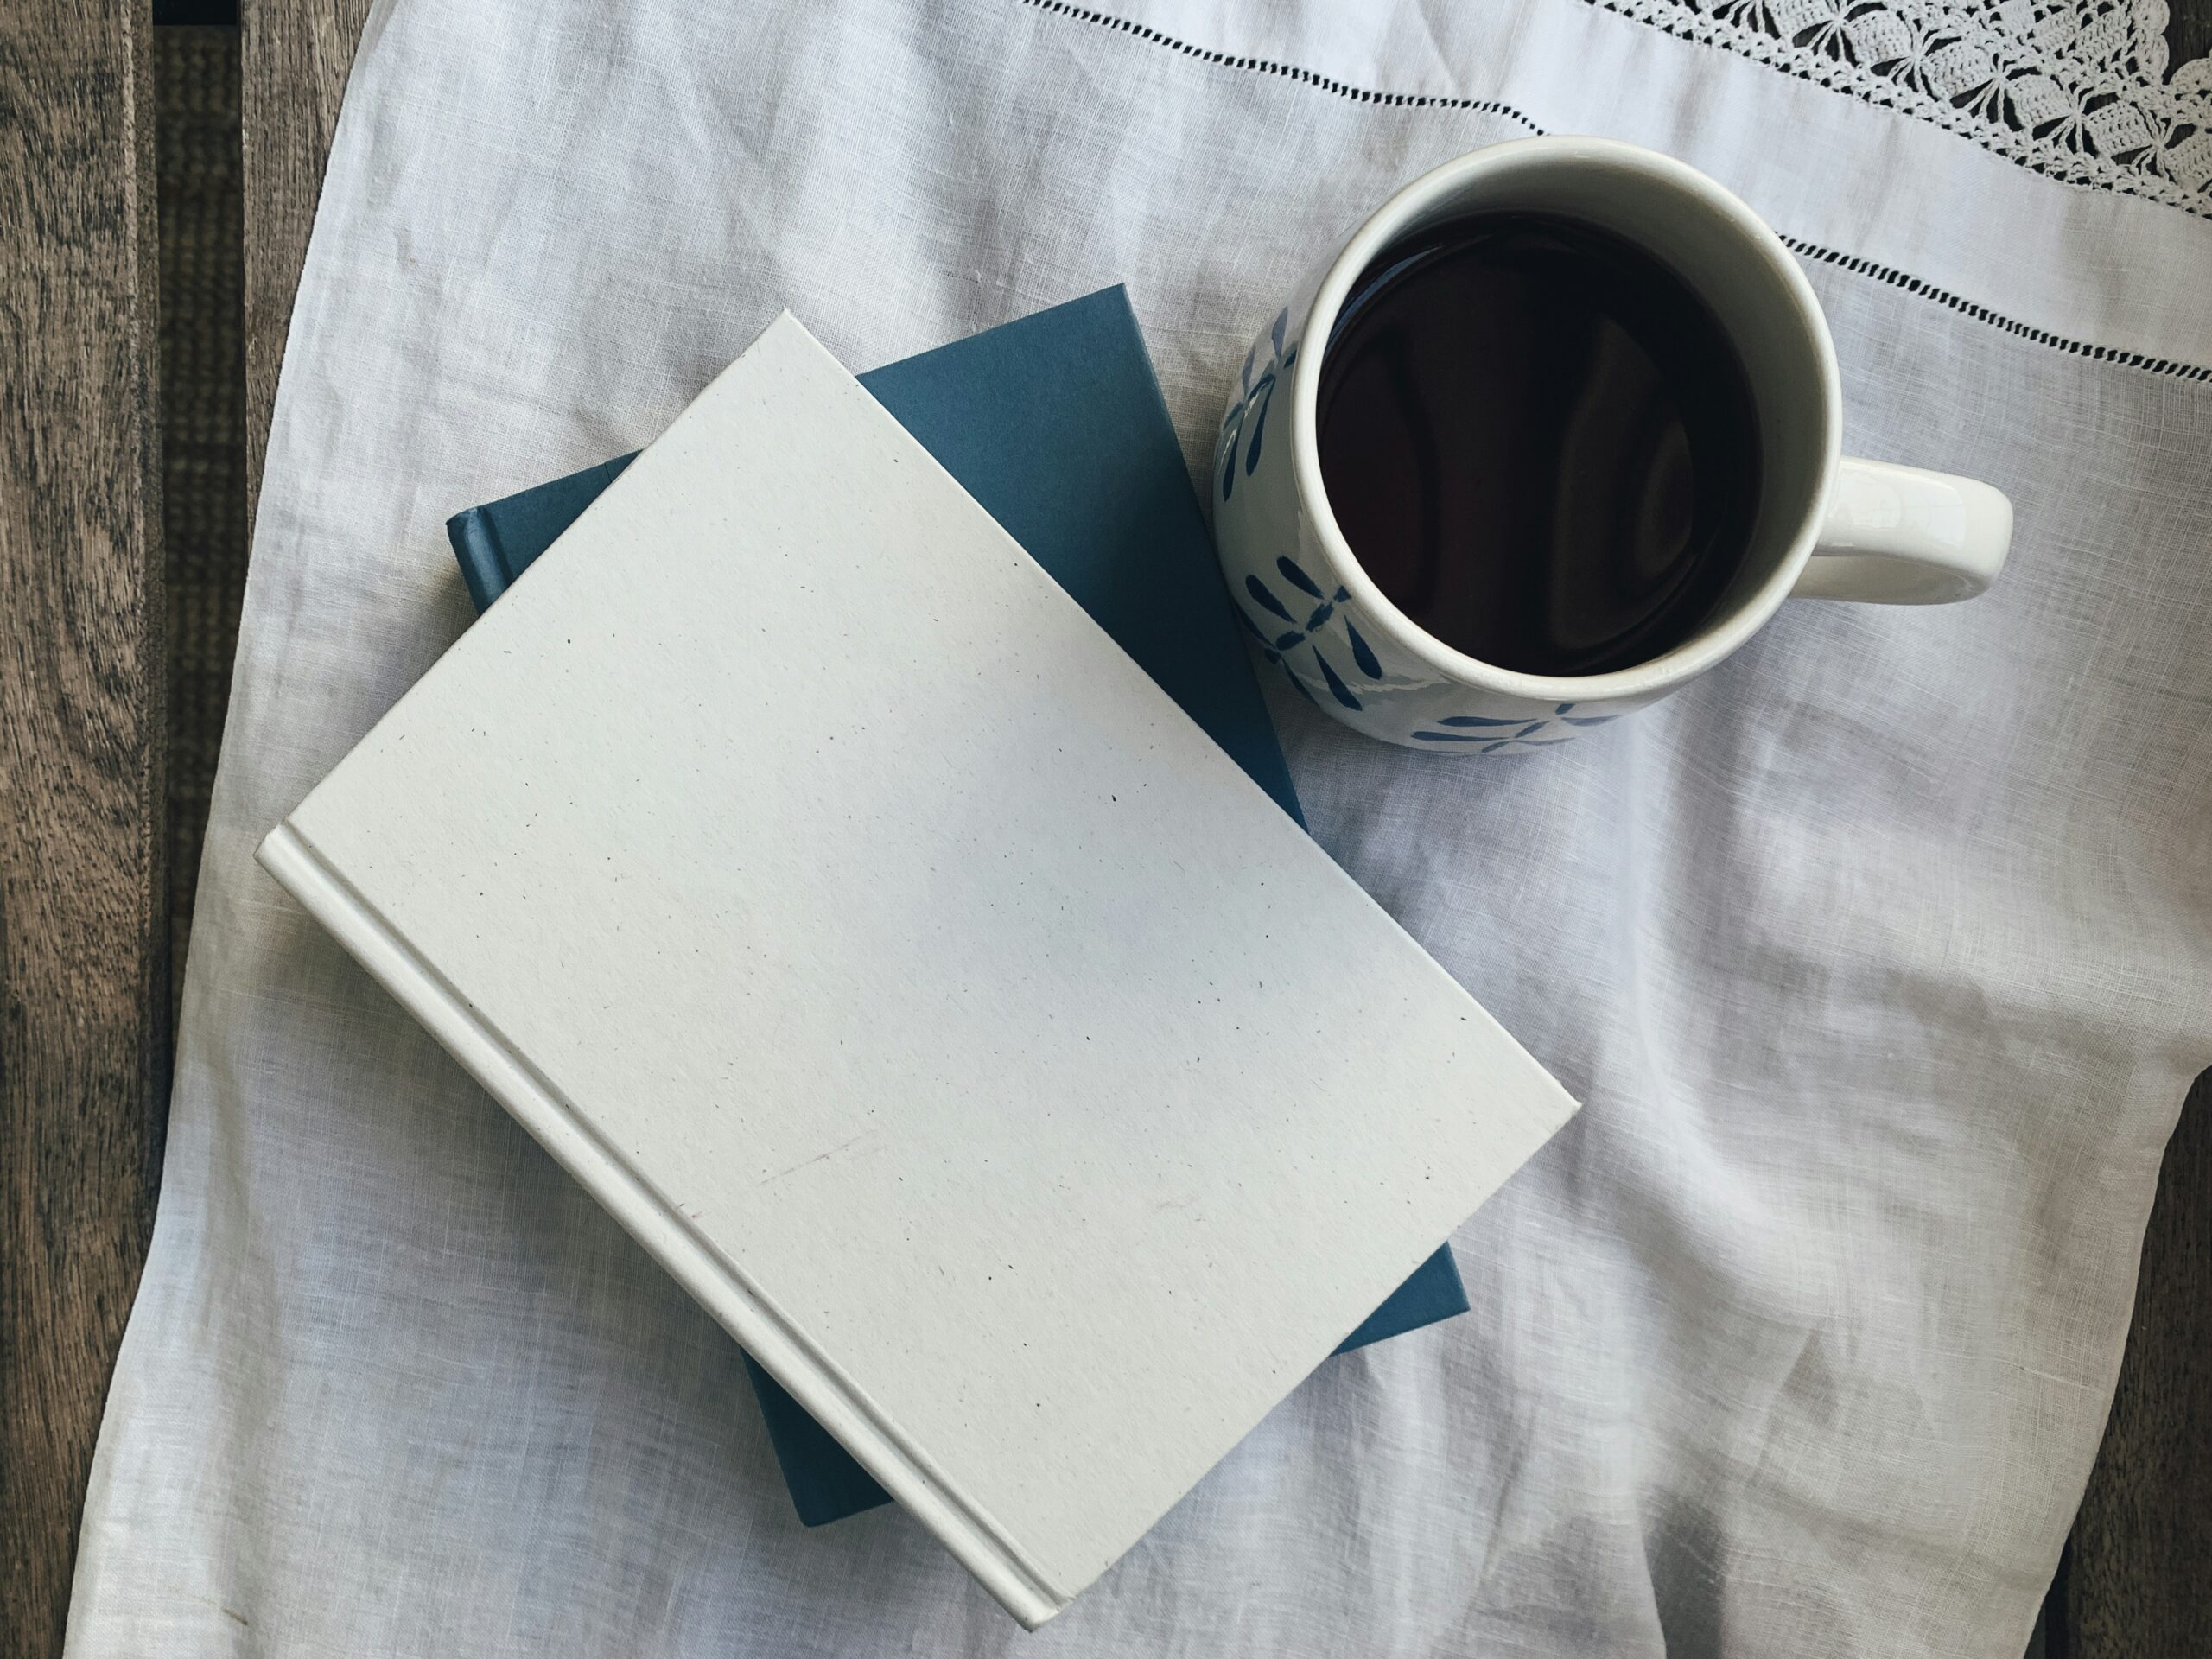 A coffee mug and a journal laid out - a week of content ideas for Mental Health Week, designed for nonprofit and charity marketing efforts.